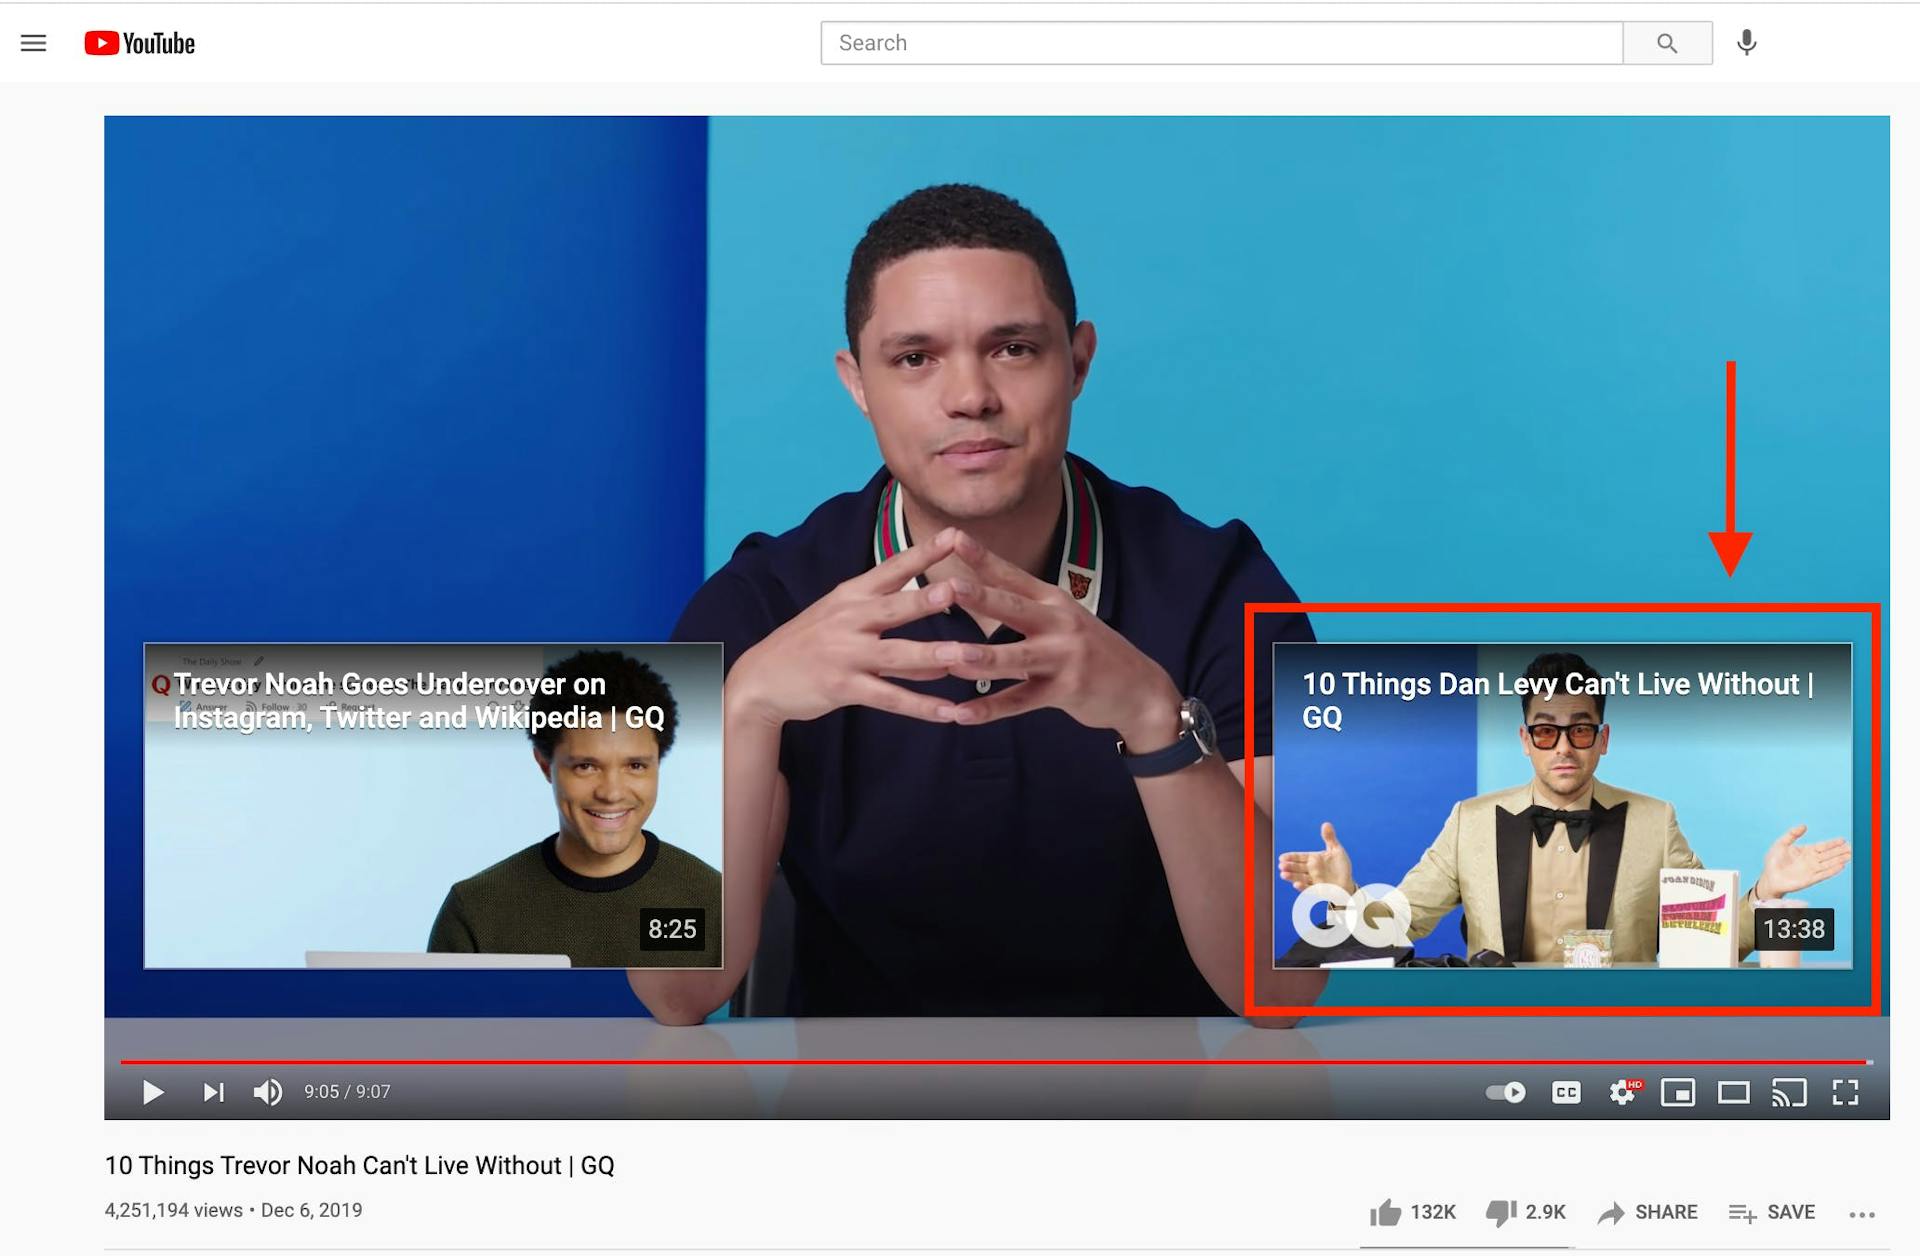 End screen notations of a video on GQ channel featuring Trevor Noah. Next video suggested is one from the same series. 